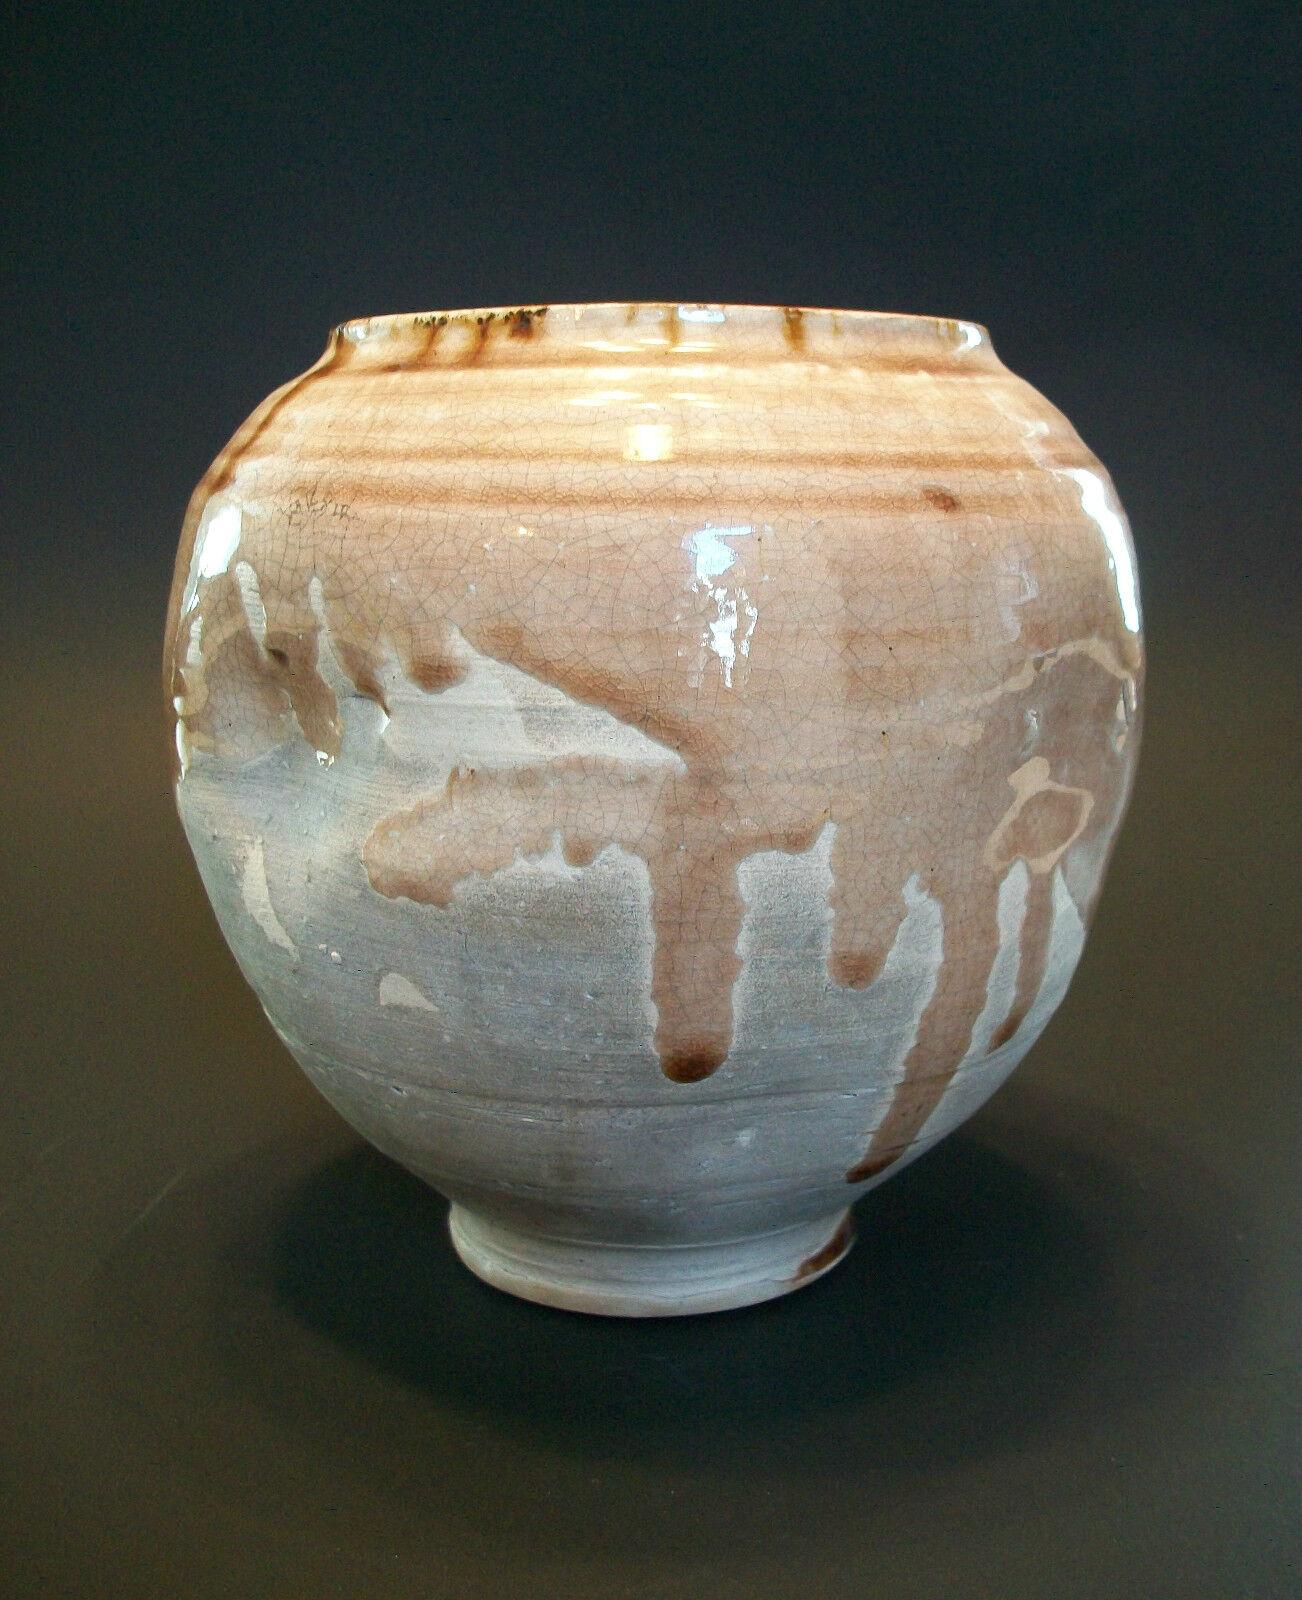 Anglo-Japanese Vintage Glazed Ceramic Vase - Dimpled Sides - Unsigned - Late 20th Century For Sale